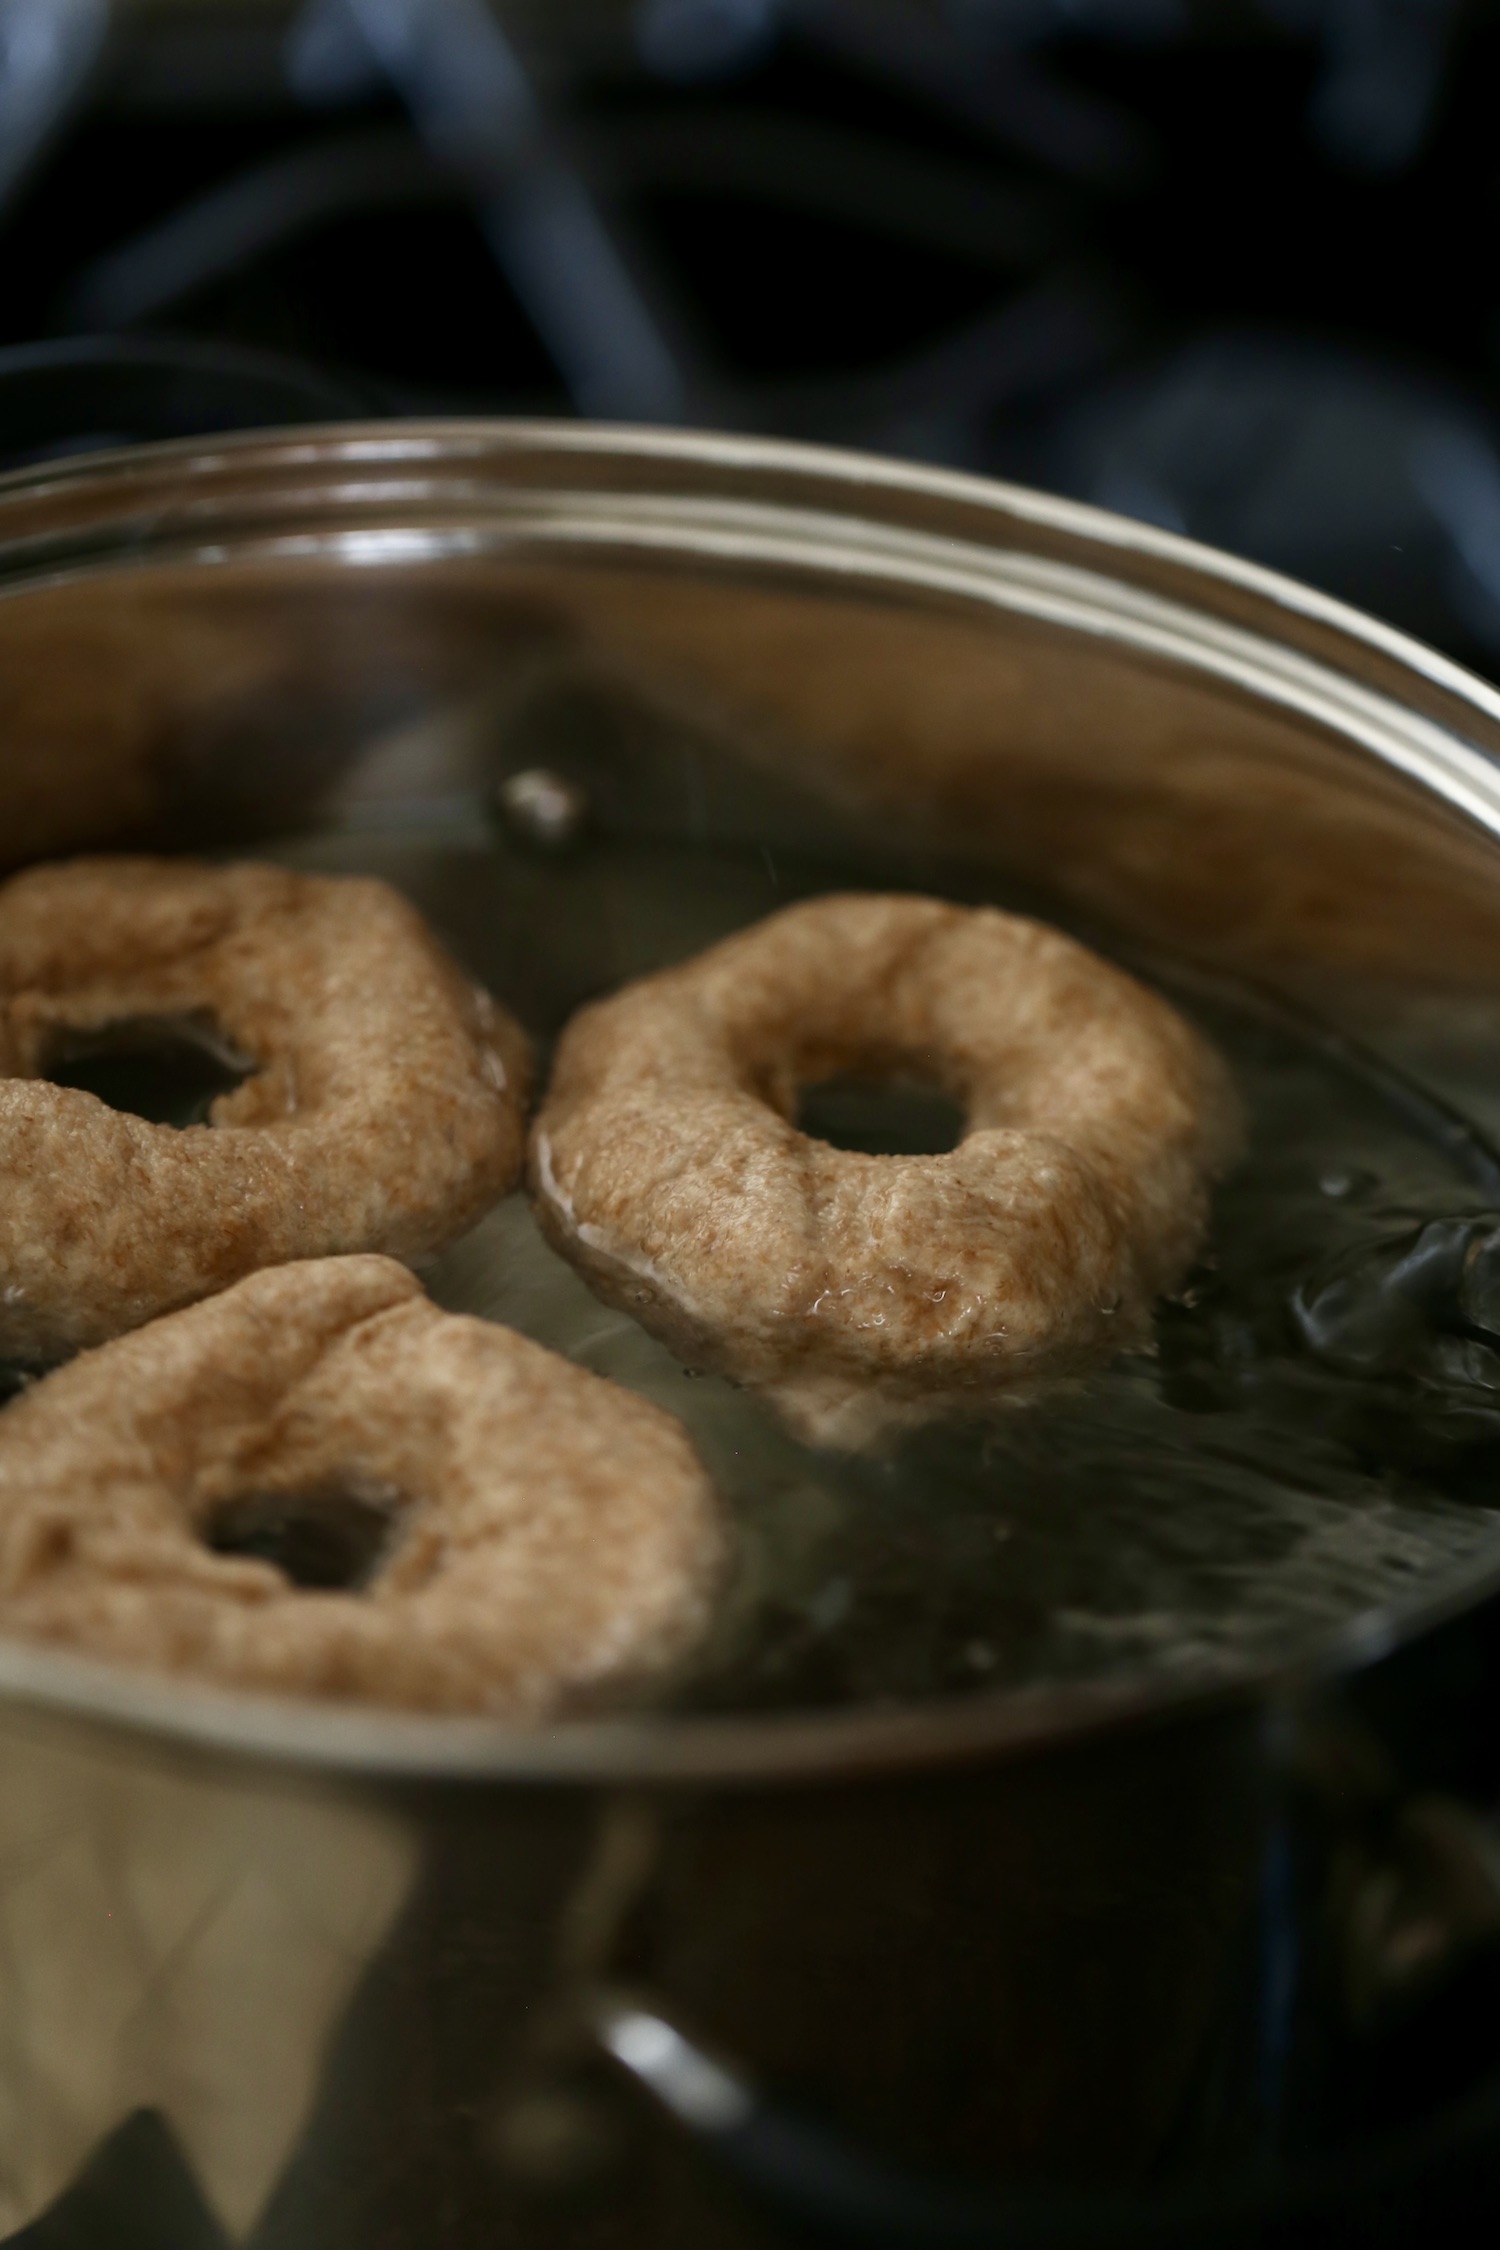 Three whole wheat bagels boiling in a large silver pot of water.